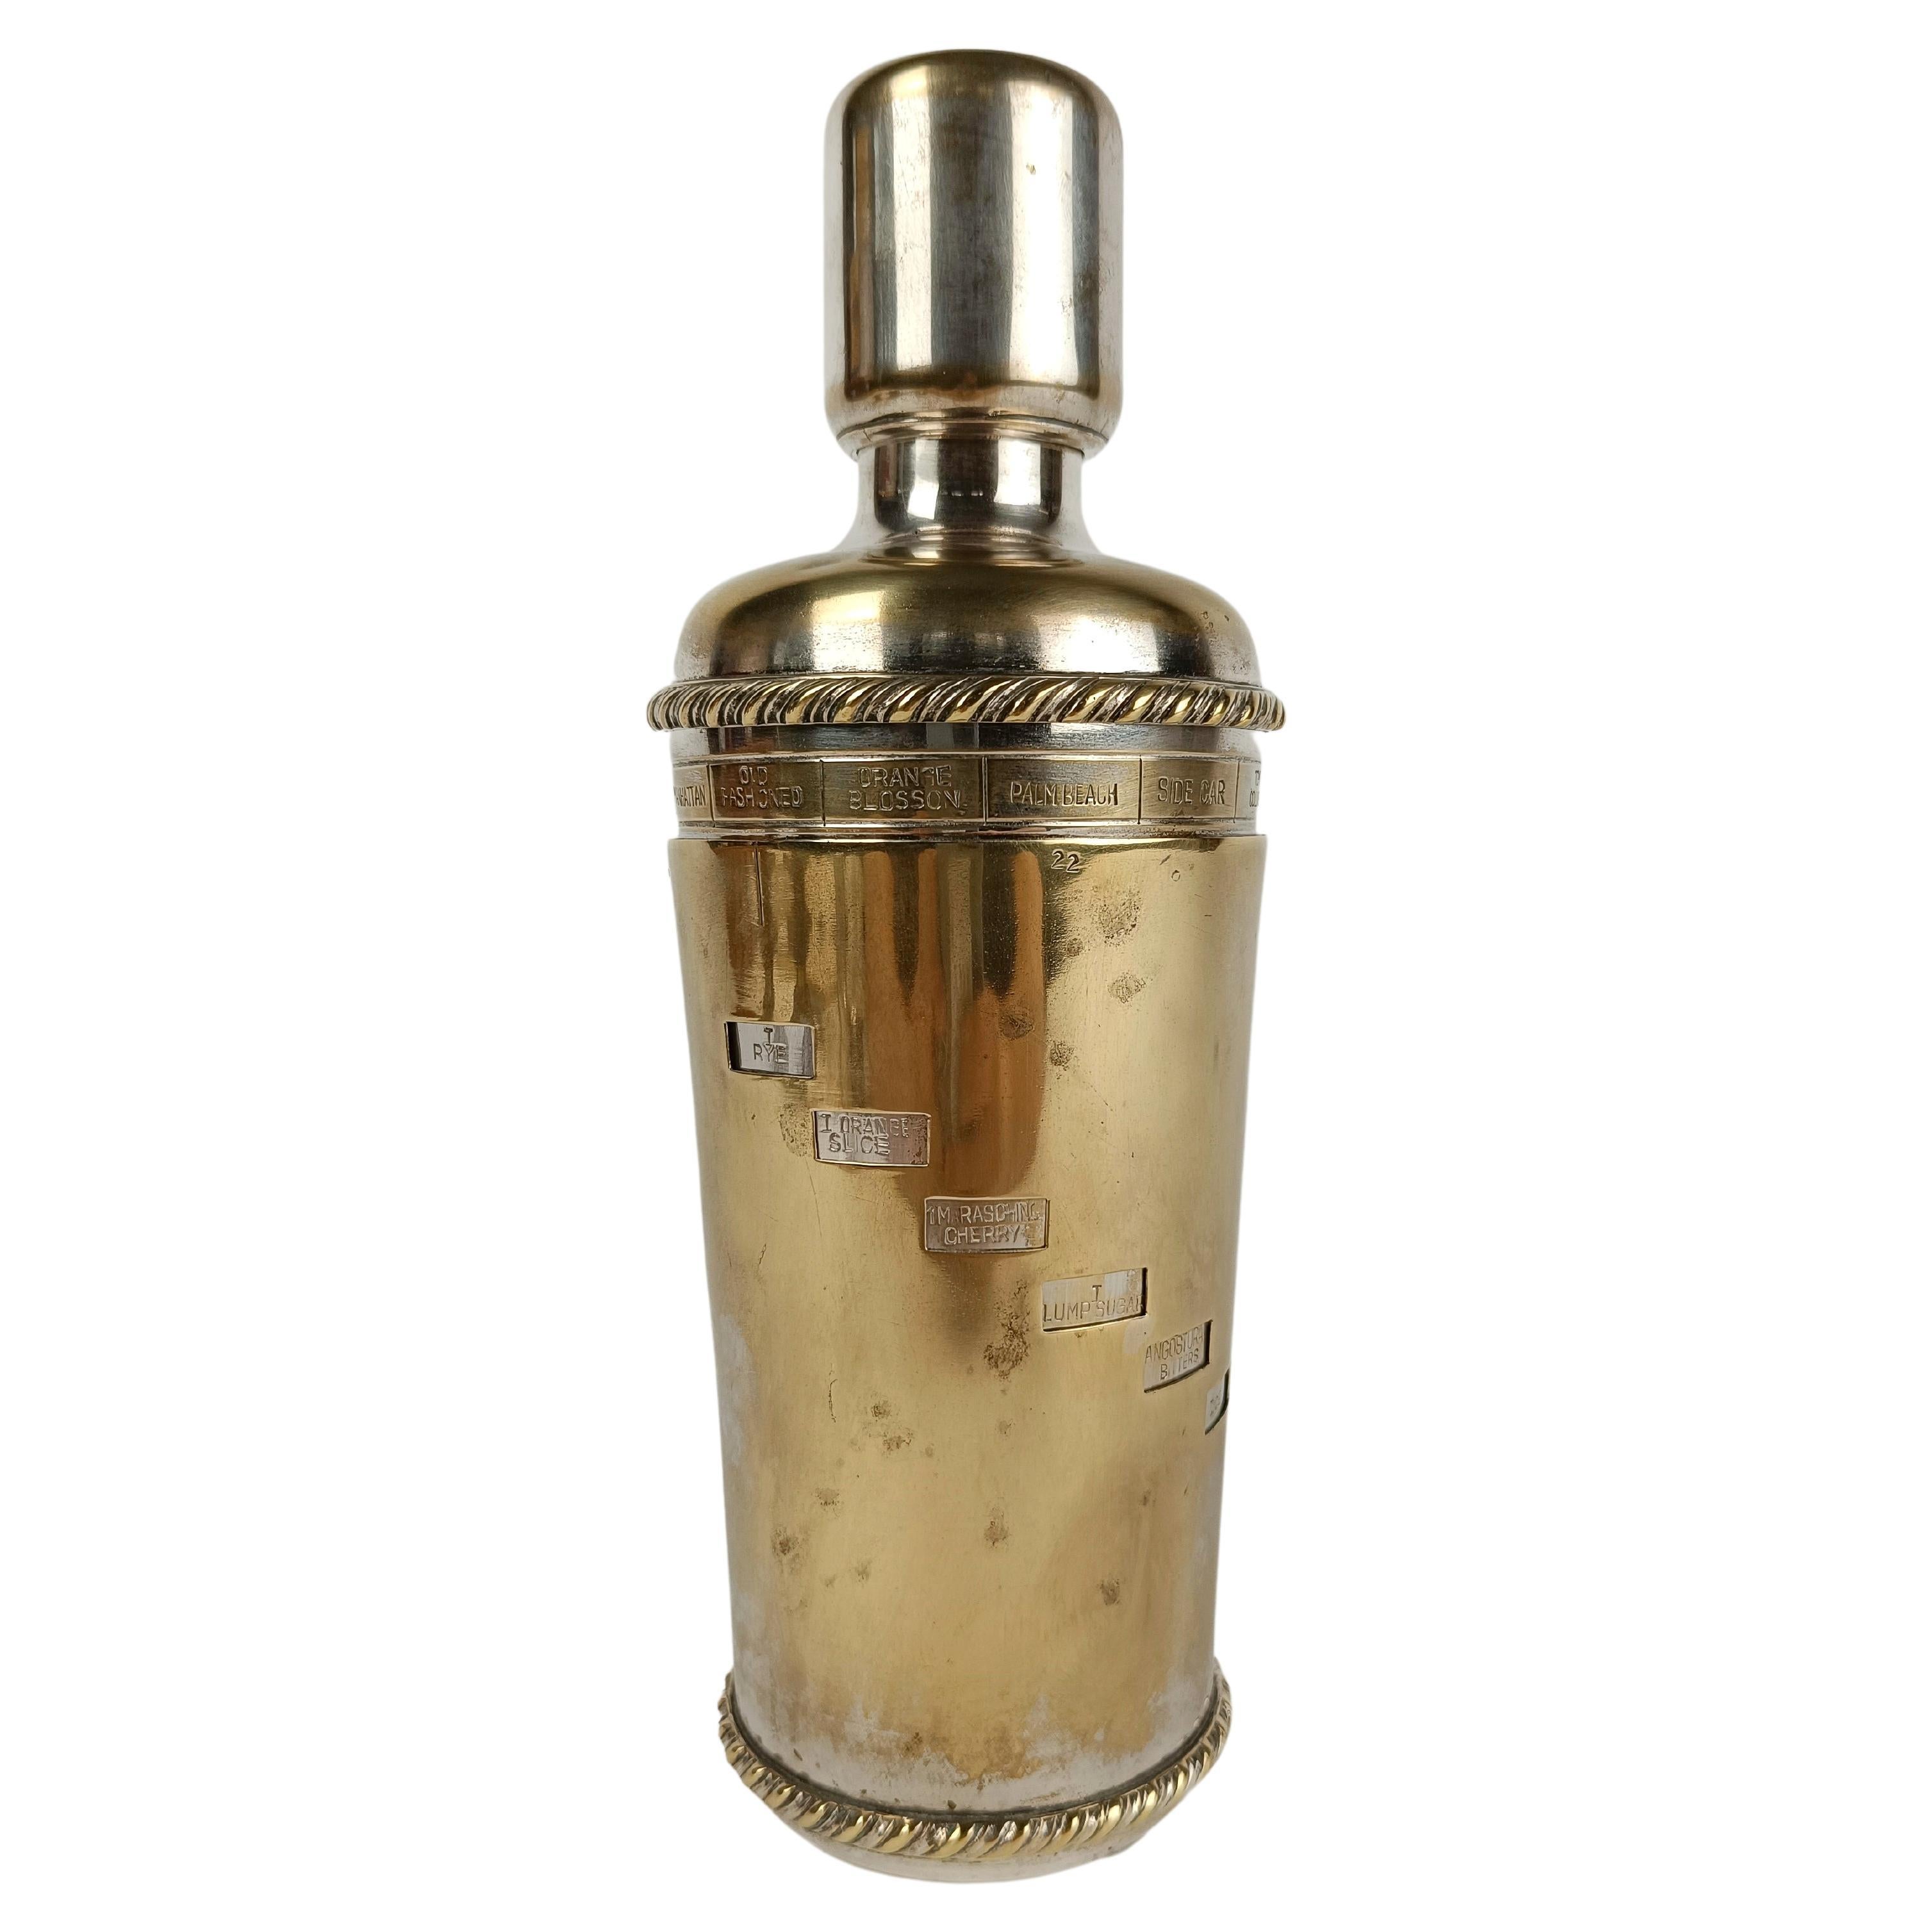 Italian Midcentury Silver Plated Menu Cocktail Shaker by Fornari